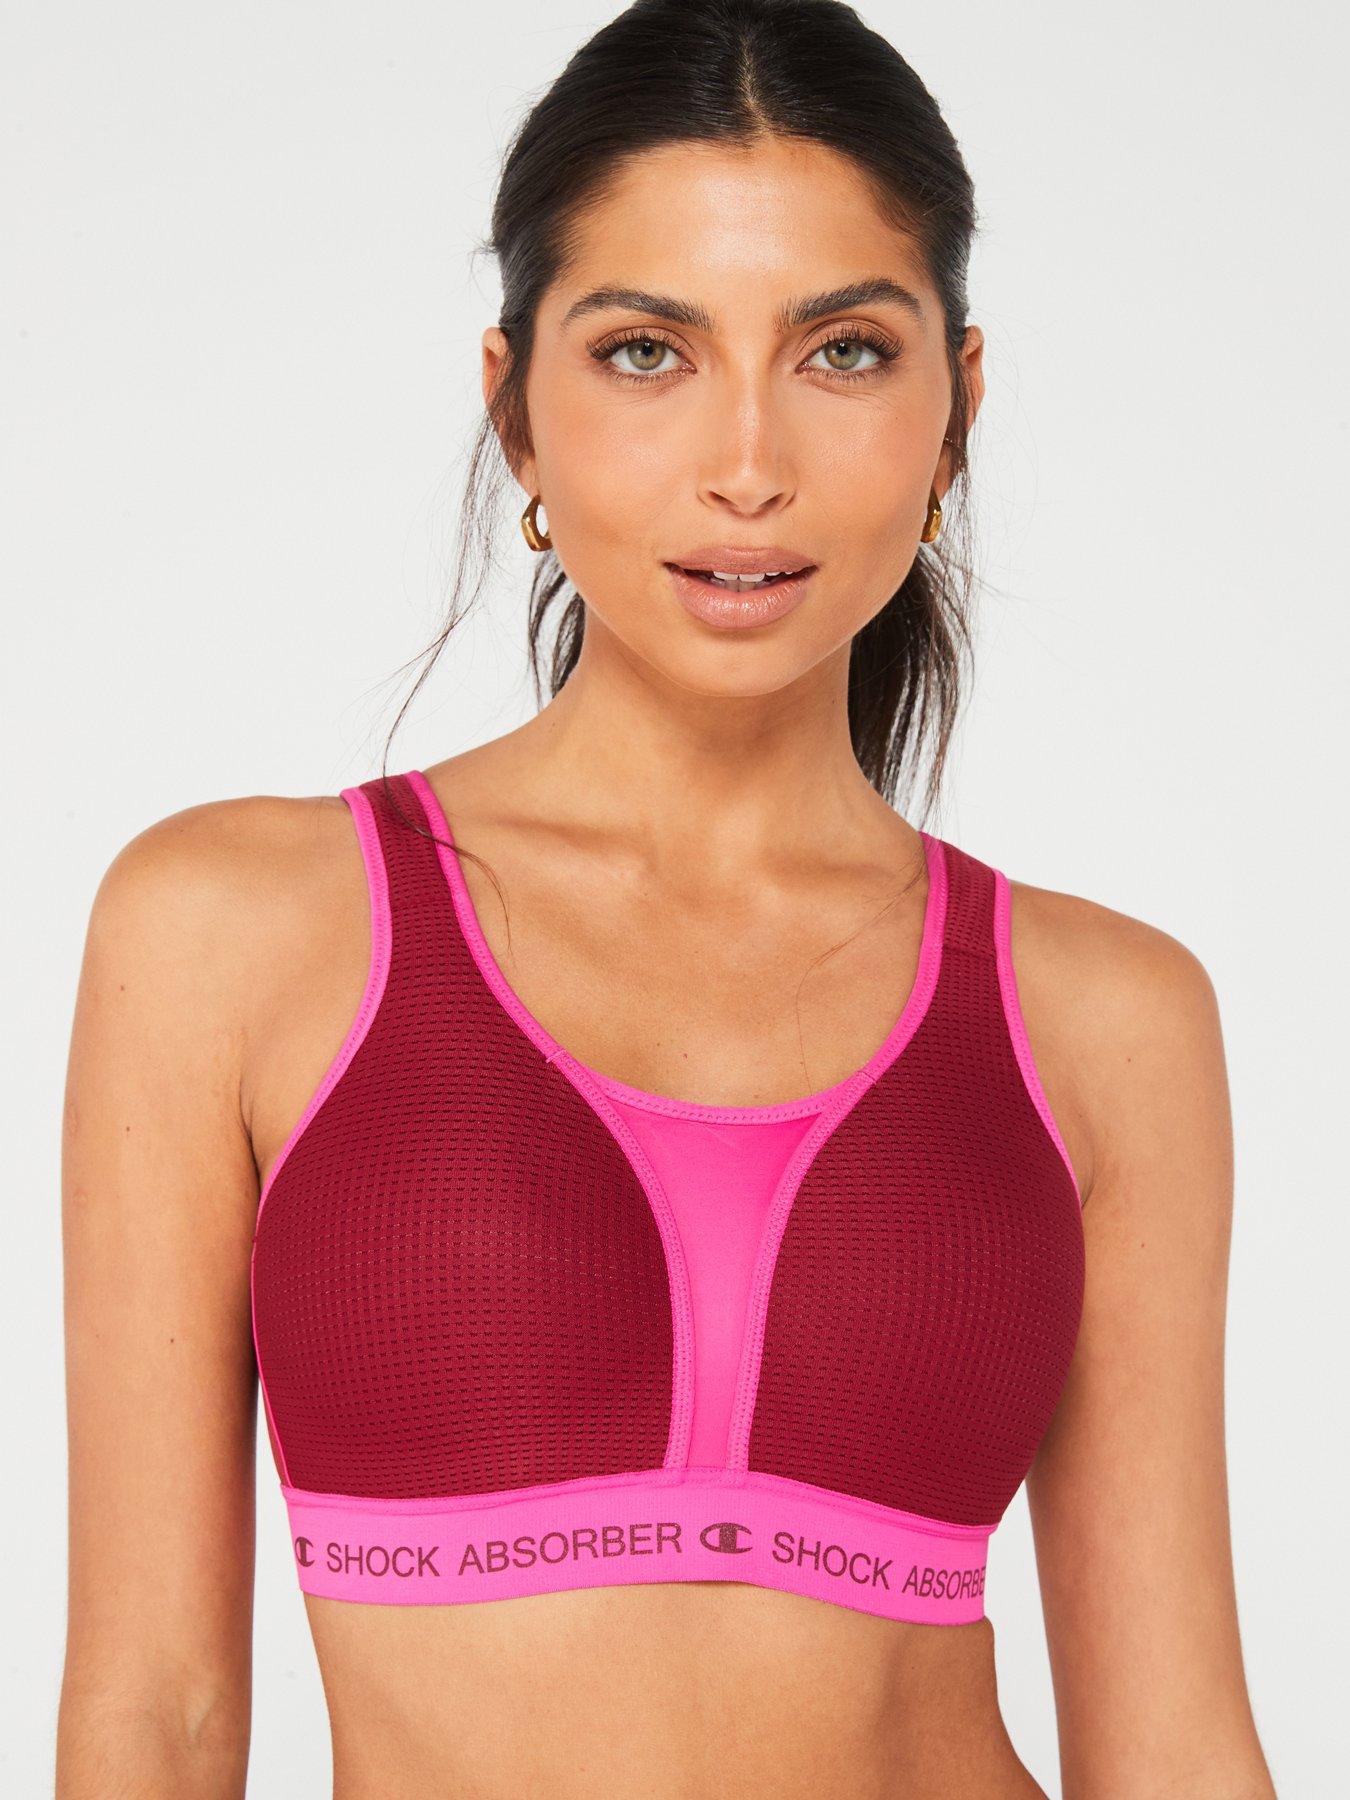 Shock Absorber D+ Classic Support Bra Review - Sports Bras Direct